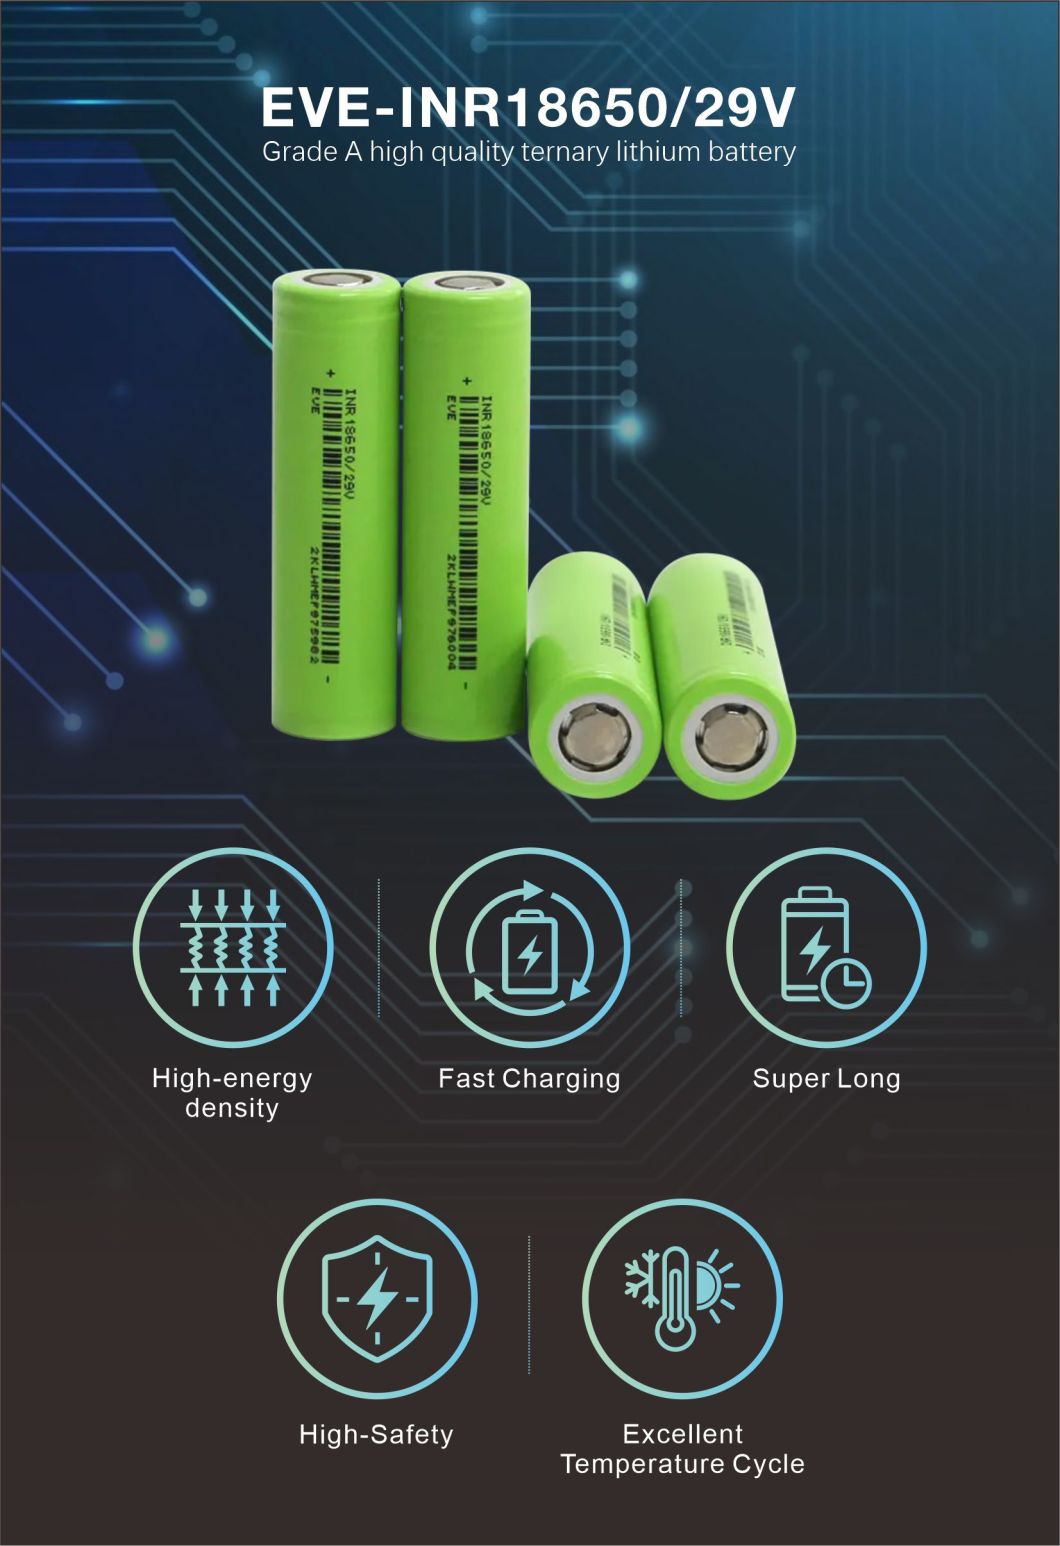 Eve 3.7V 18650 2850mAh Cylindrical LiFePO4 Lithium-Ion Battery for E-Bike/Electric Scooter/Drone